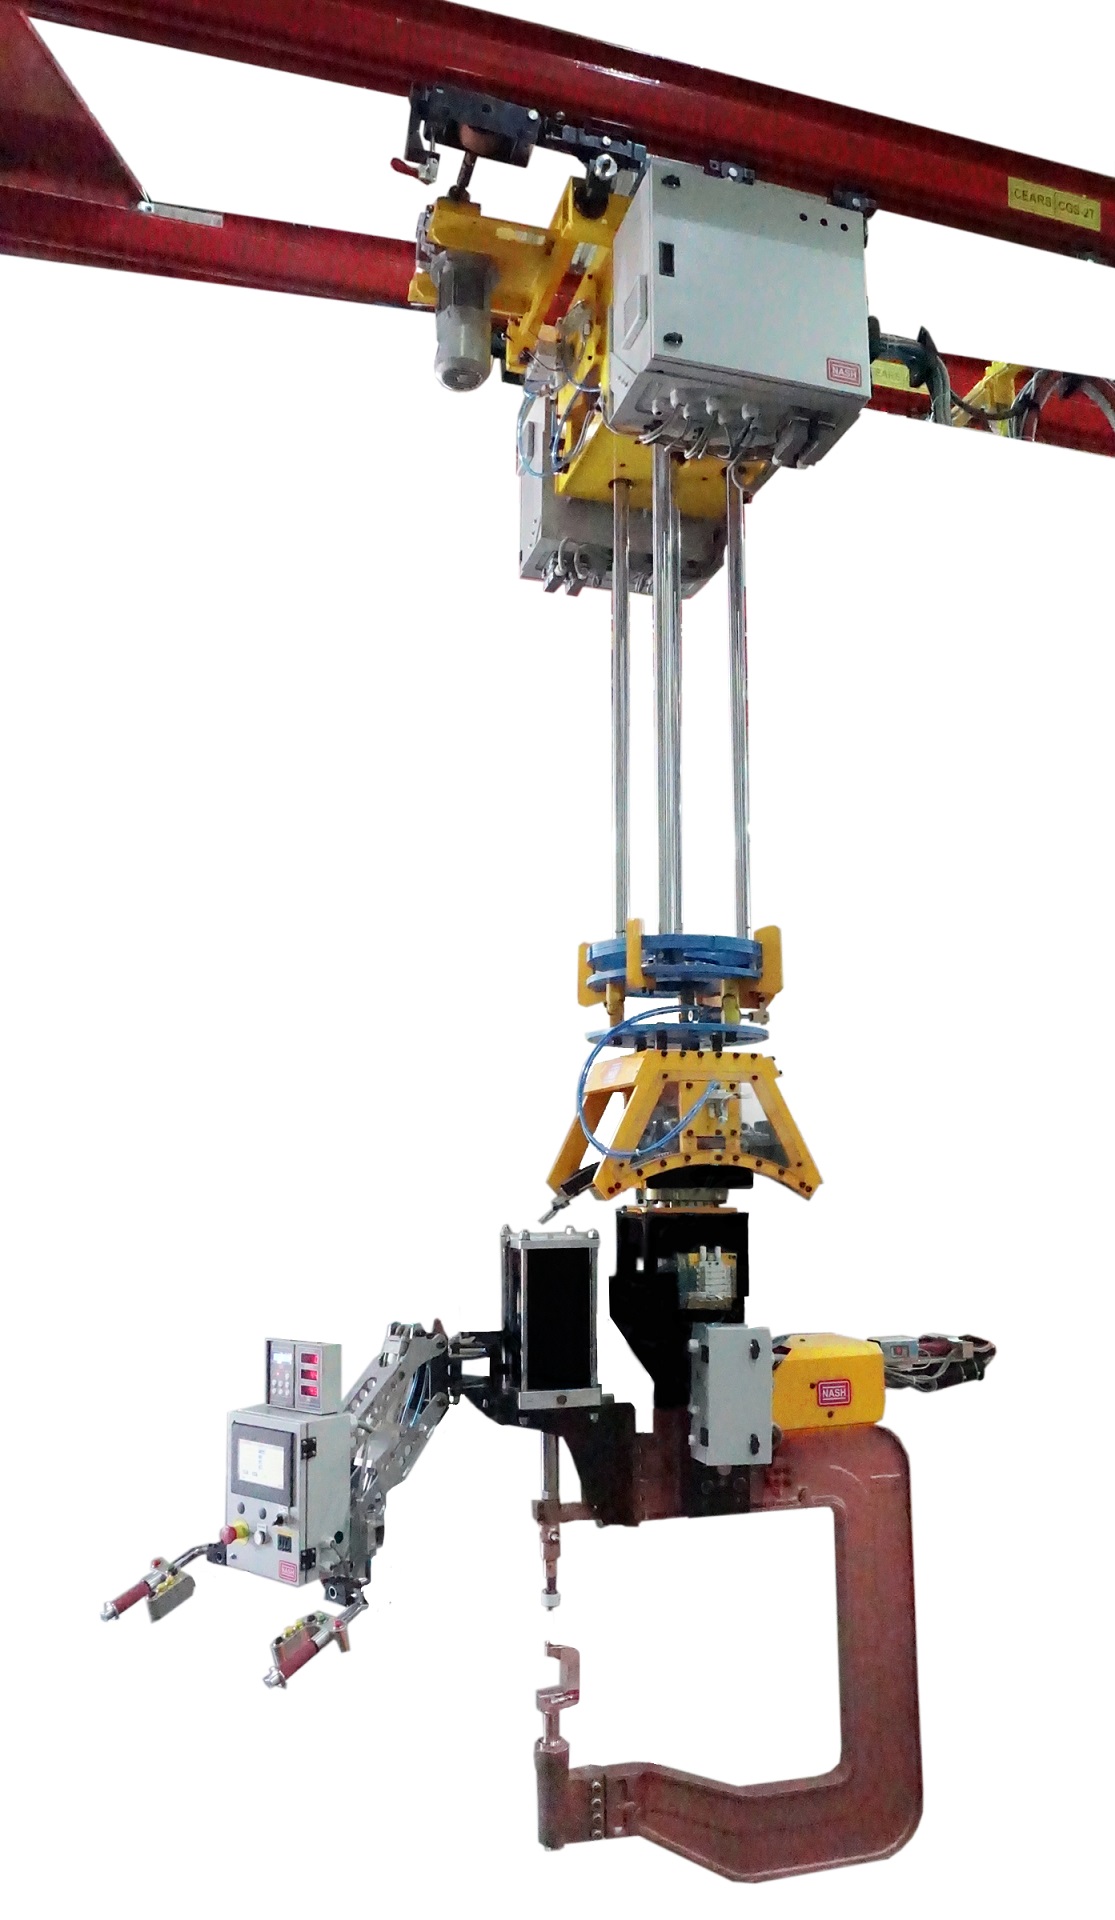 C-Type MFDC IT Gun for Metro Underframe Spot Welding (TD-820mm, TG-705mm, Tip Force-1500Kgf) mounted on a 5-Axis Manipulator